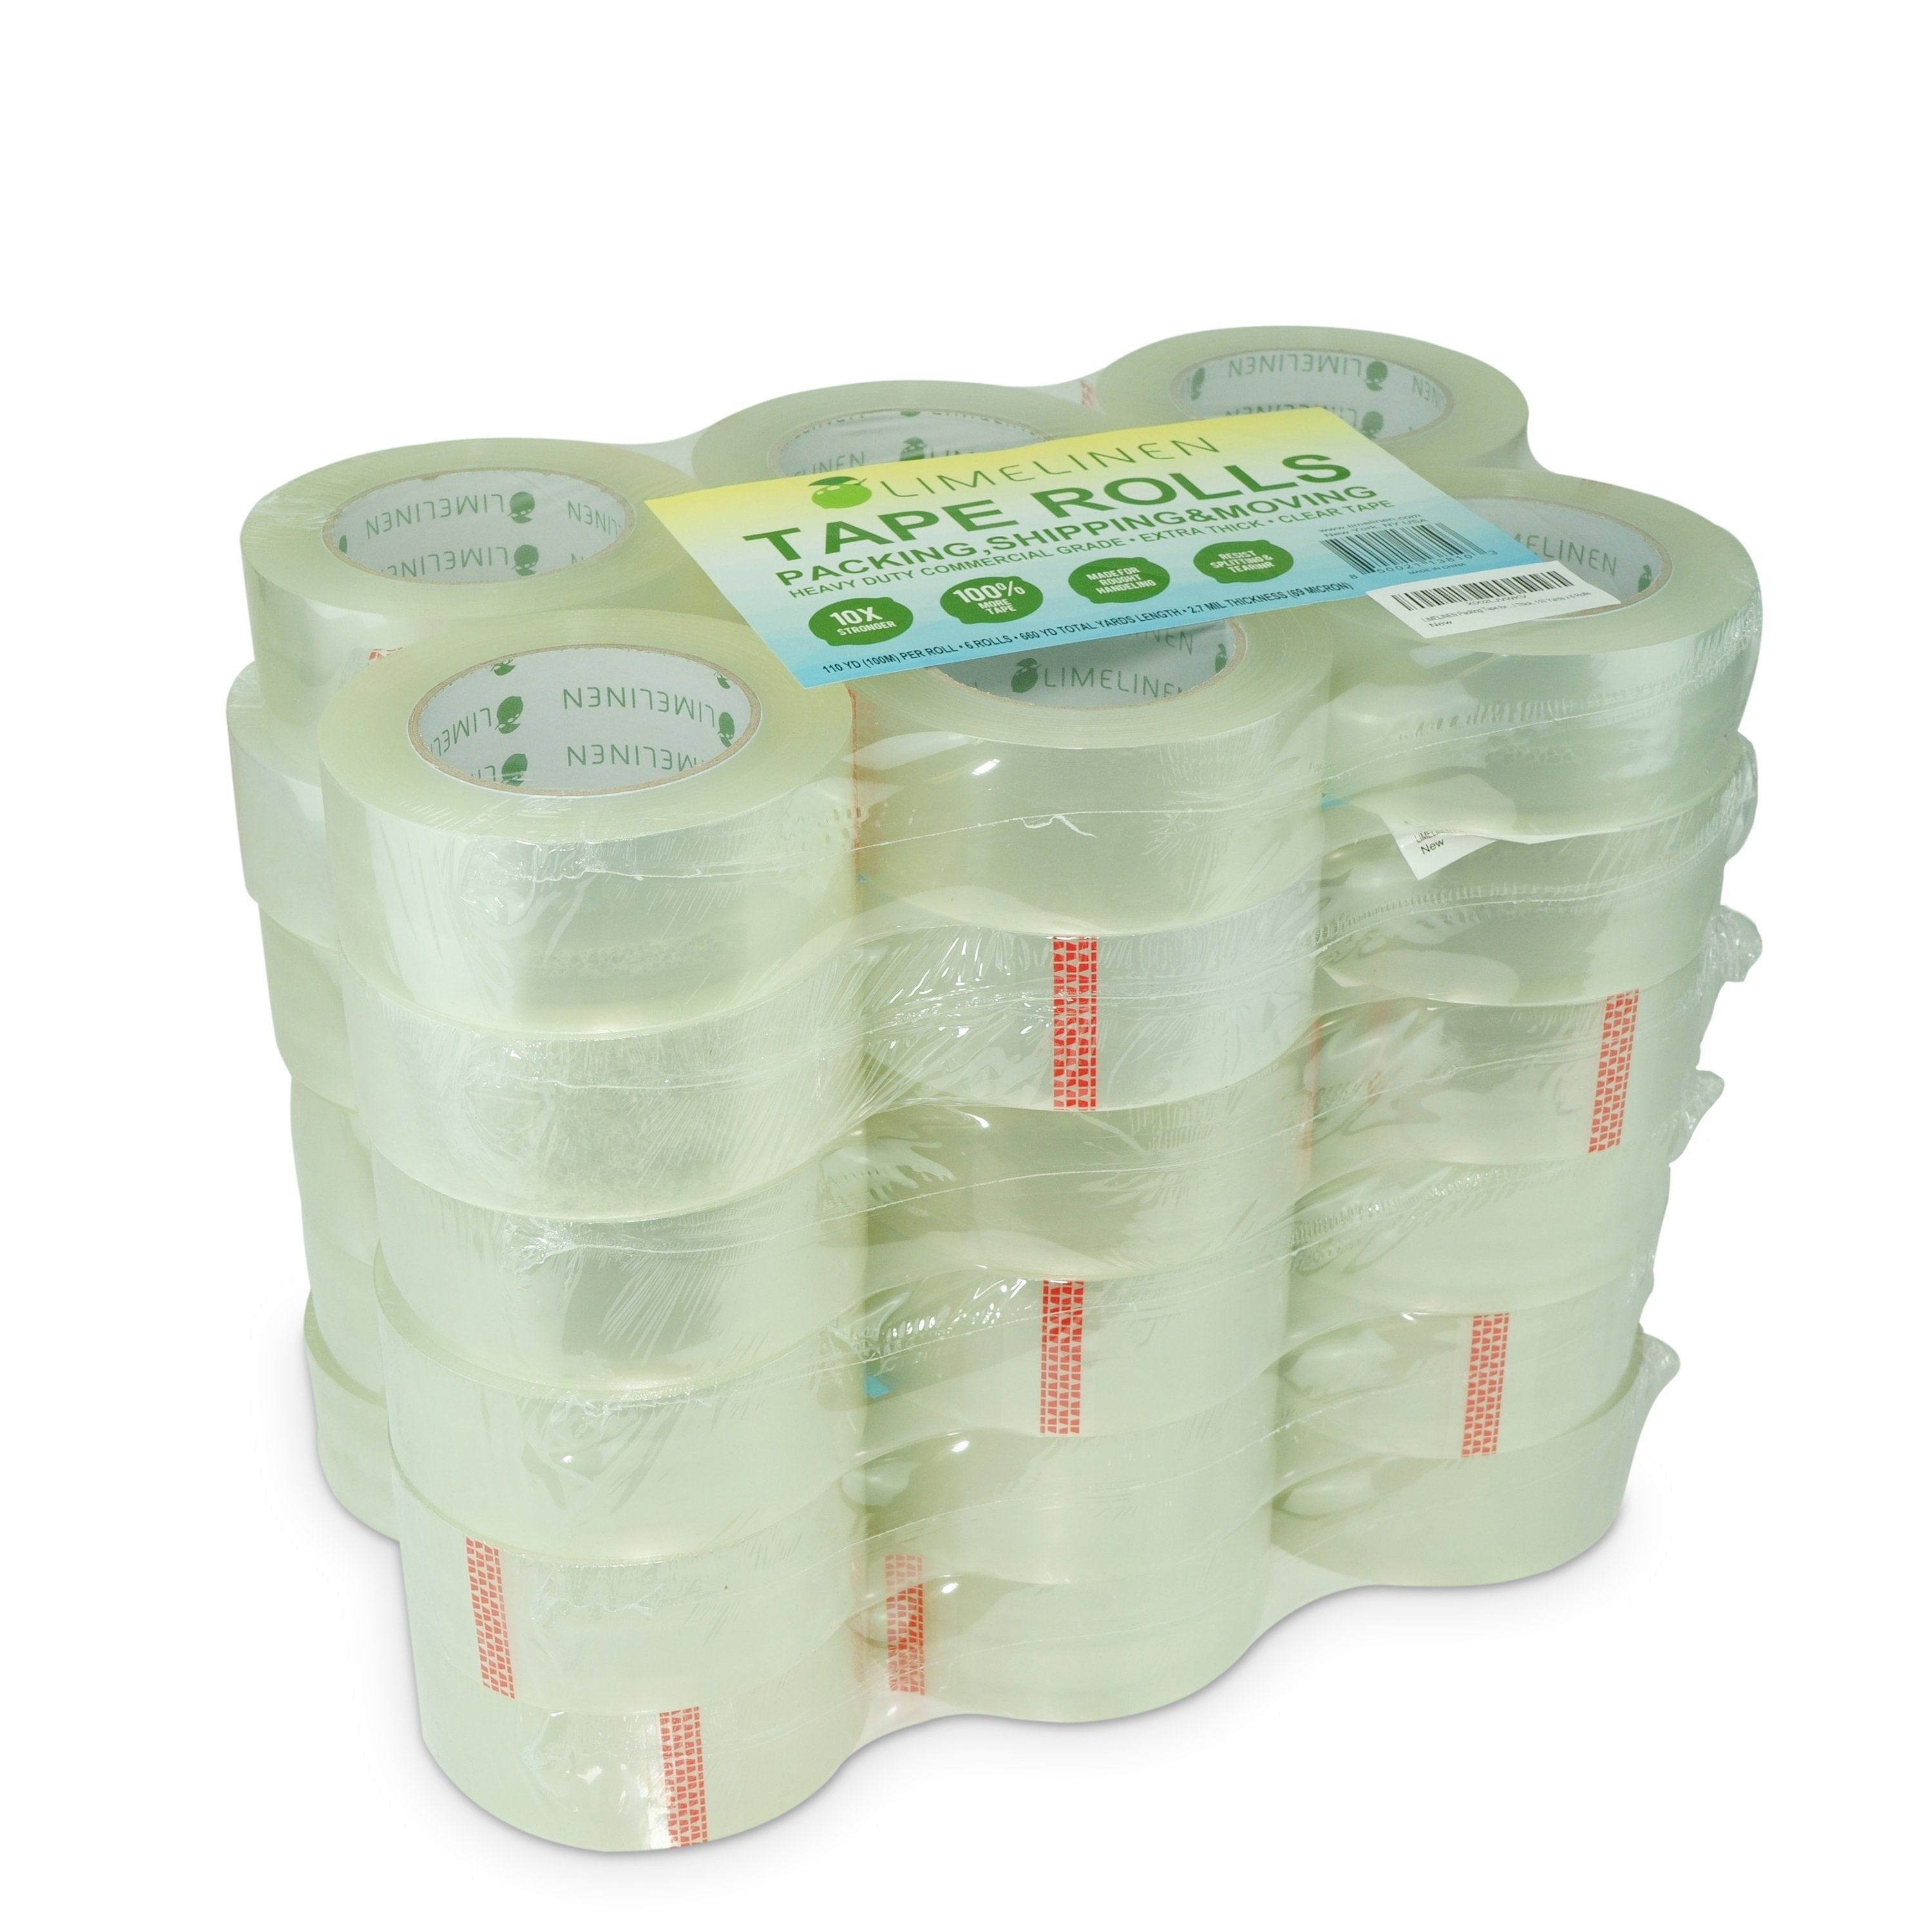 Scotch Tough Grip Clear Packing Tape, 1.88x22.2 Yd, 6 Rolls w/ Dispensers,  Pack of 1 - Esbenshades